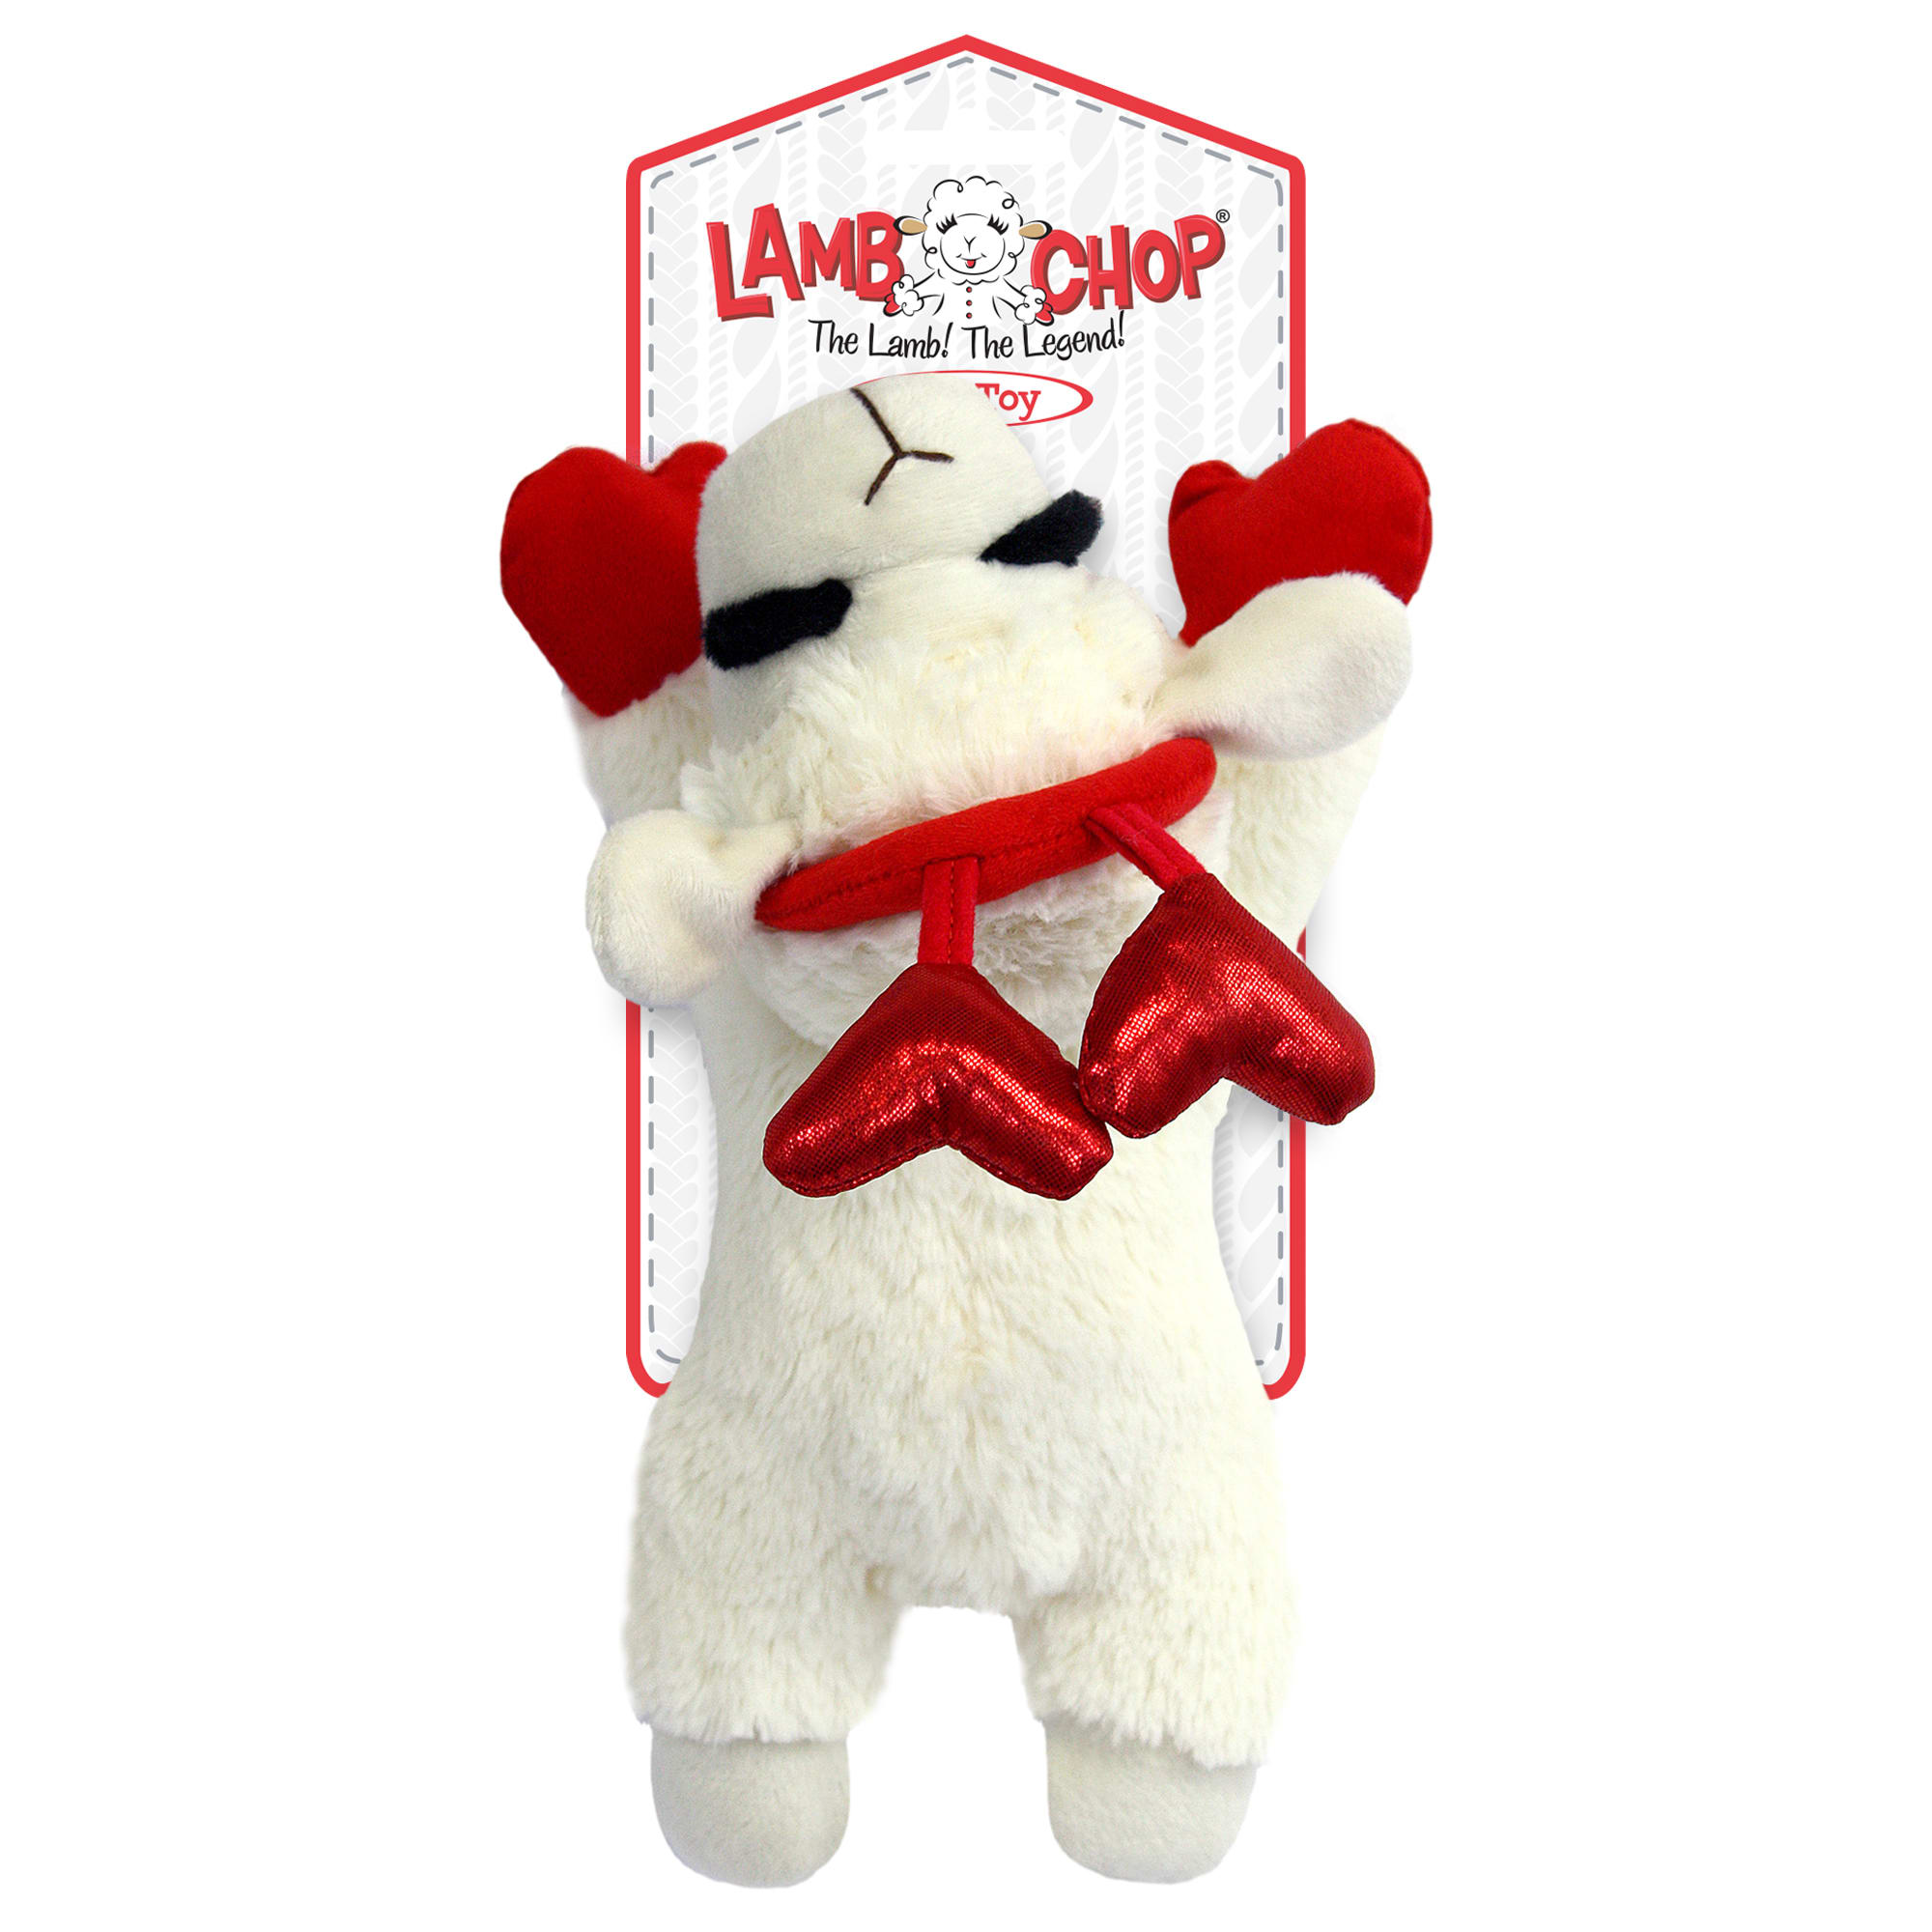 Multipet Lamb Chop Dog Toy 10/" Extremely Soft Plush Toy Lambchop is 10 tall